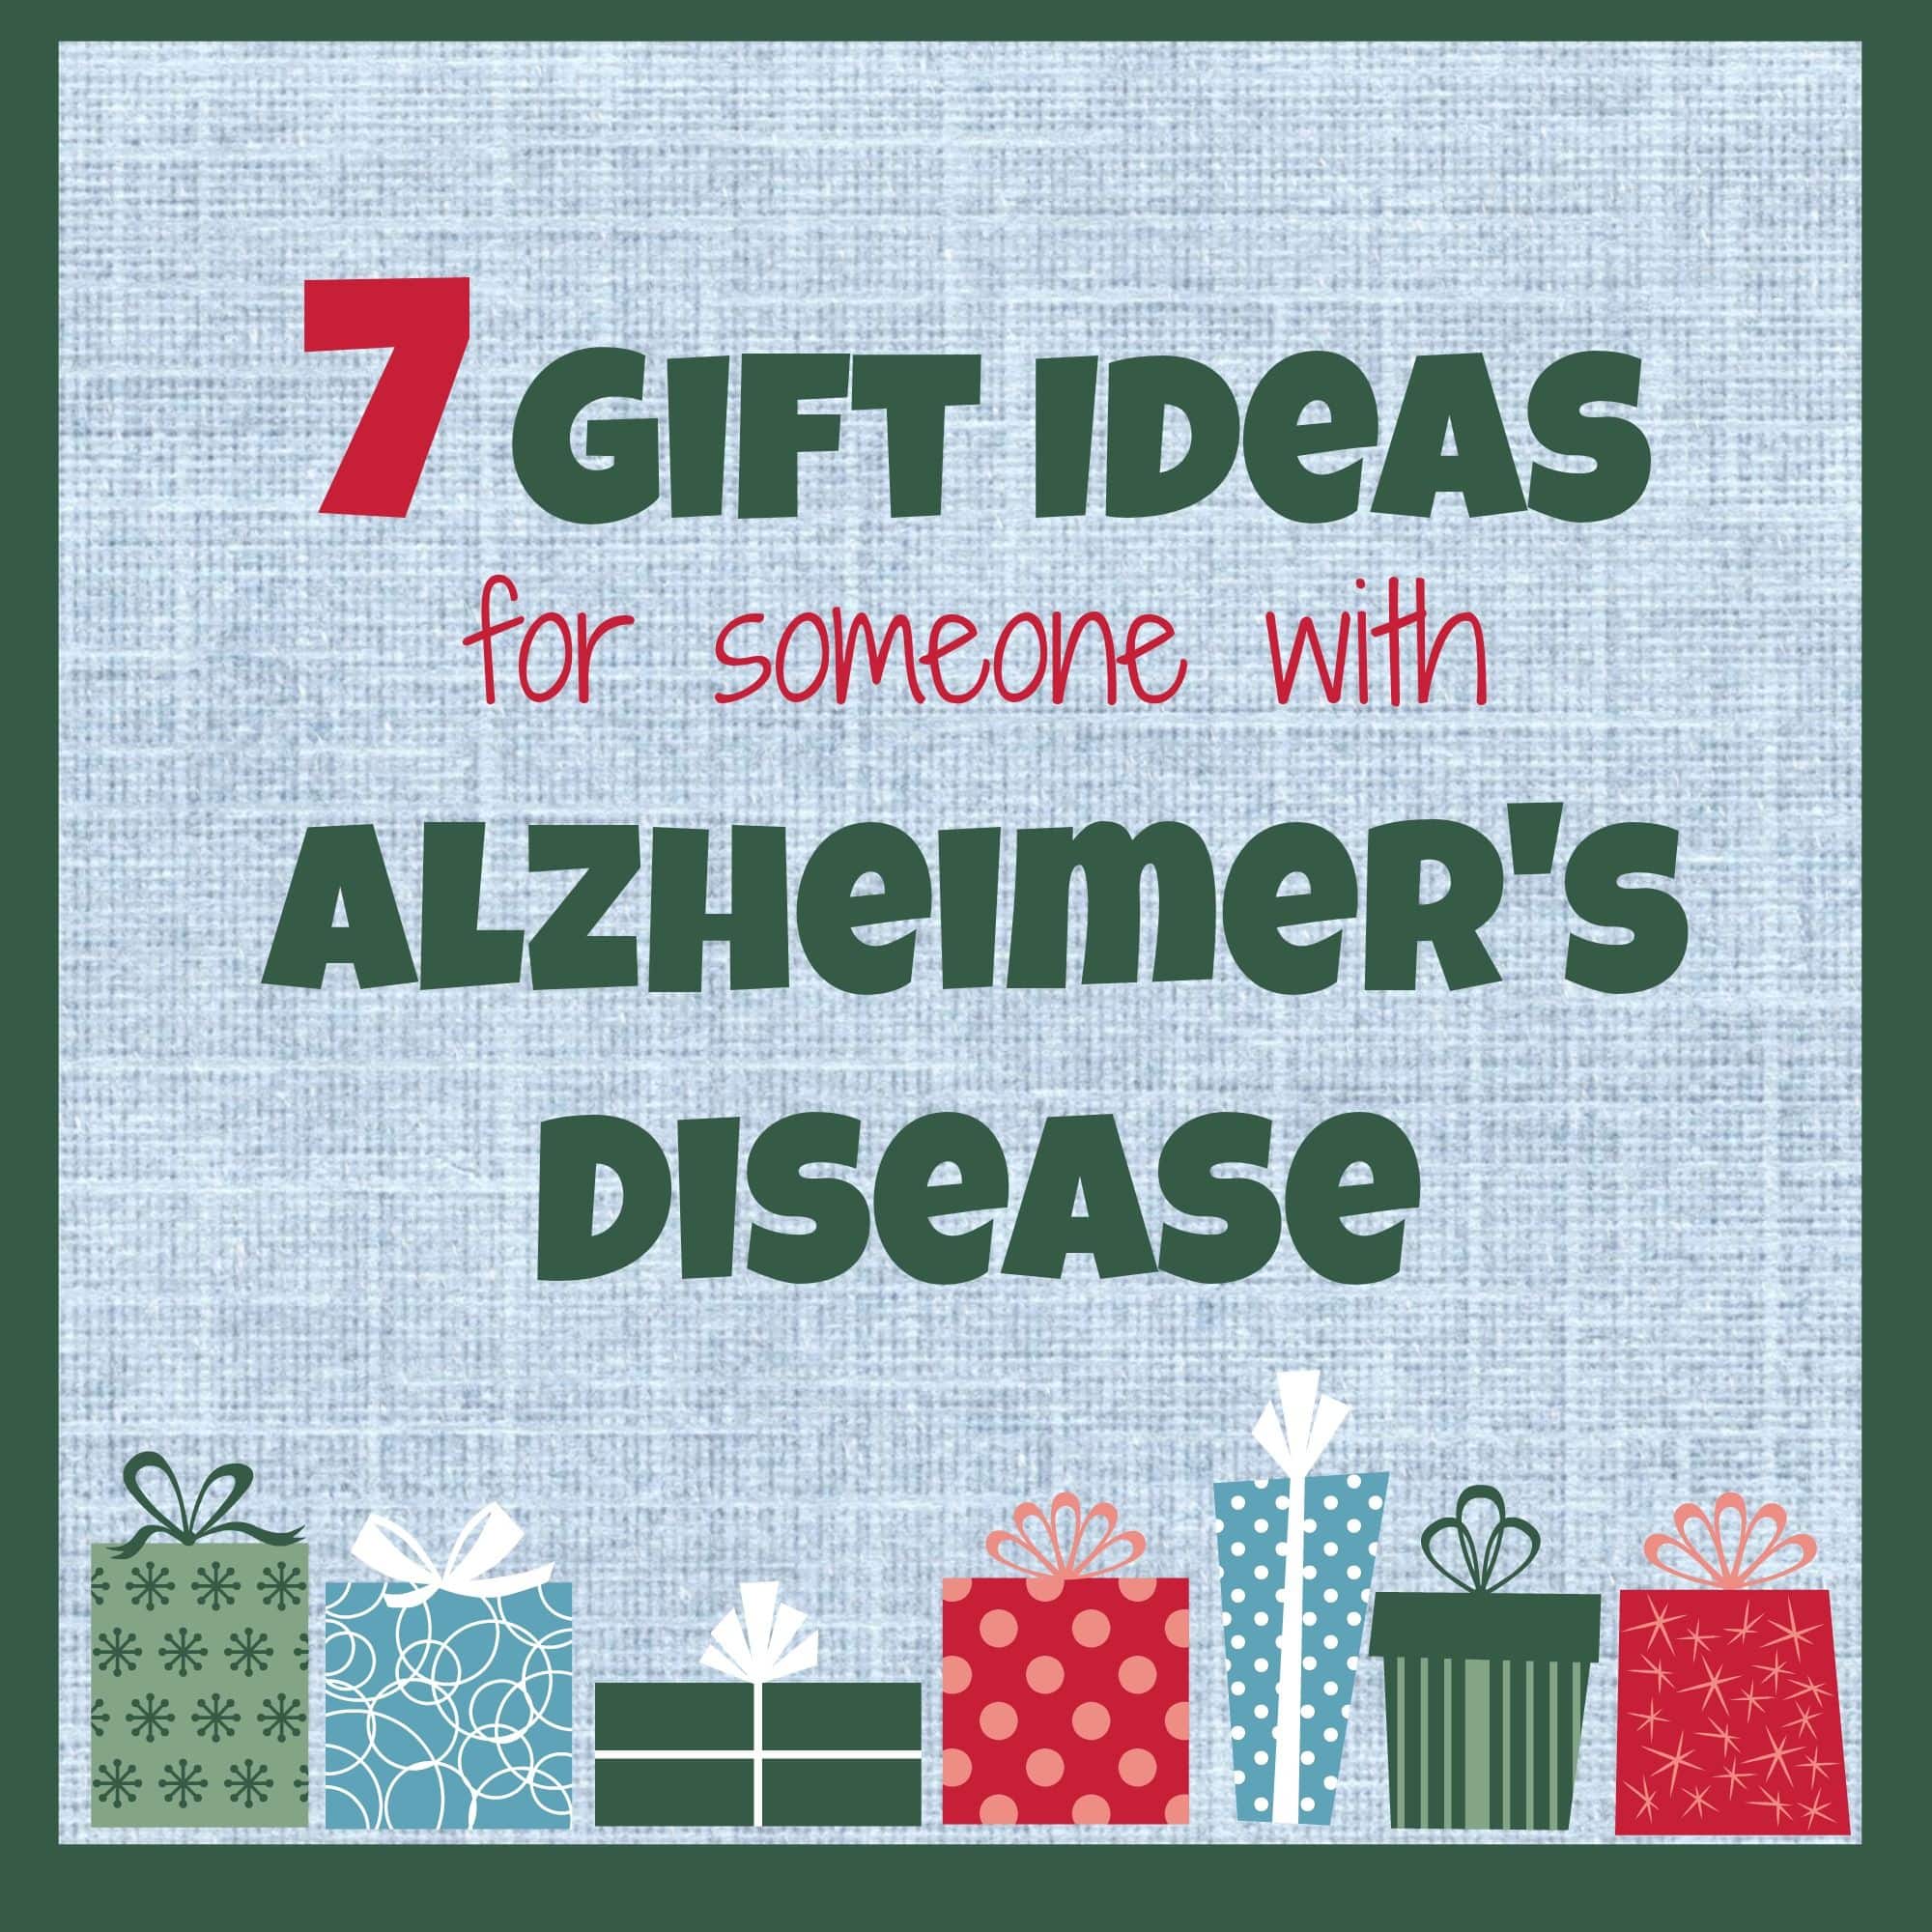 7 gift ideas for loved ones suffering from Alzheimer